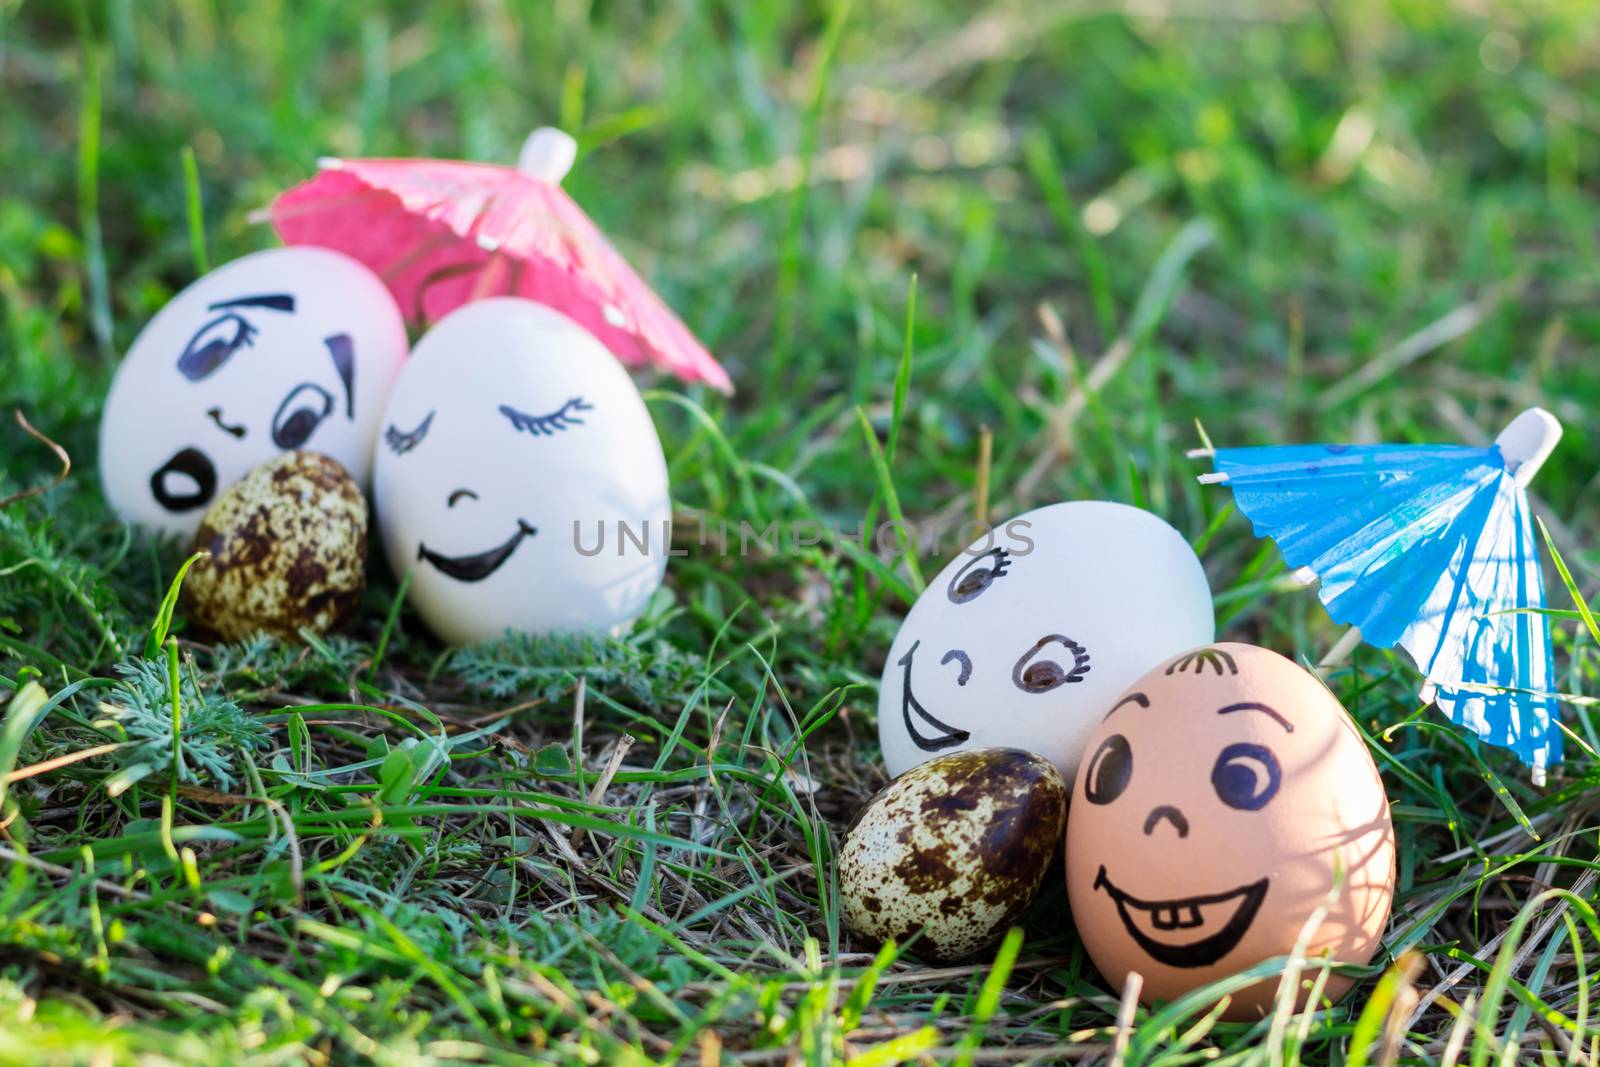 Funny eggs imitating two couples and surprised white parent of versicolored baby